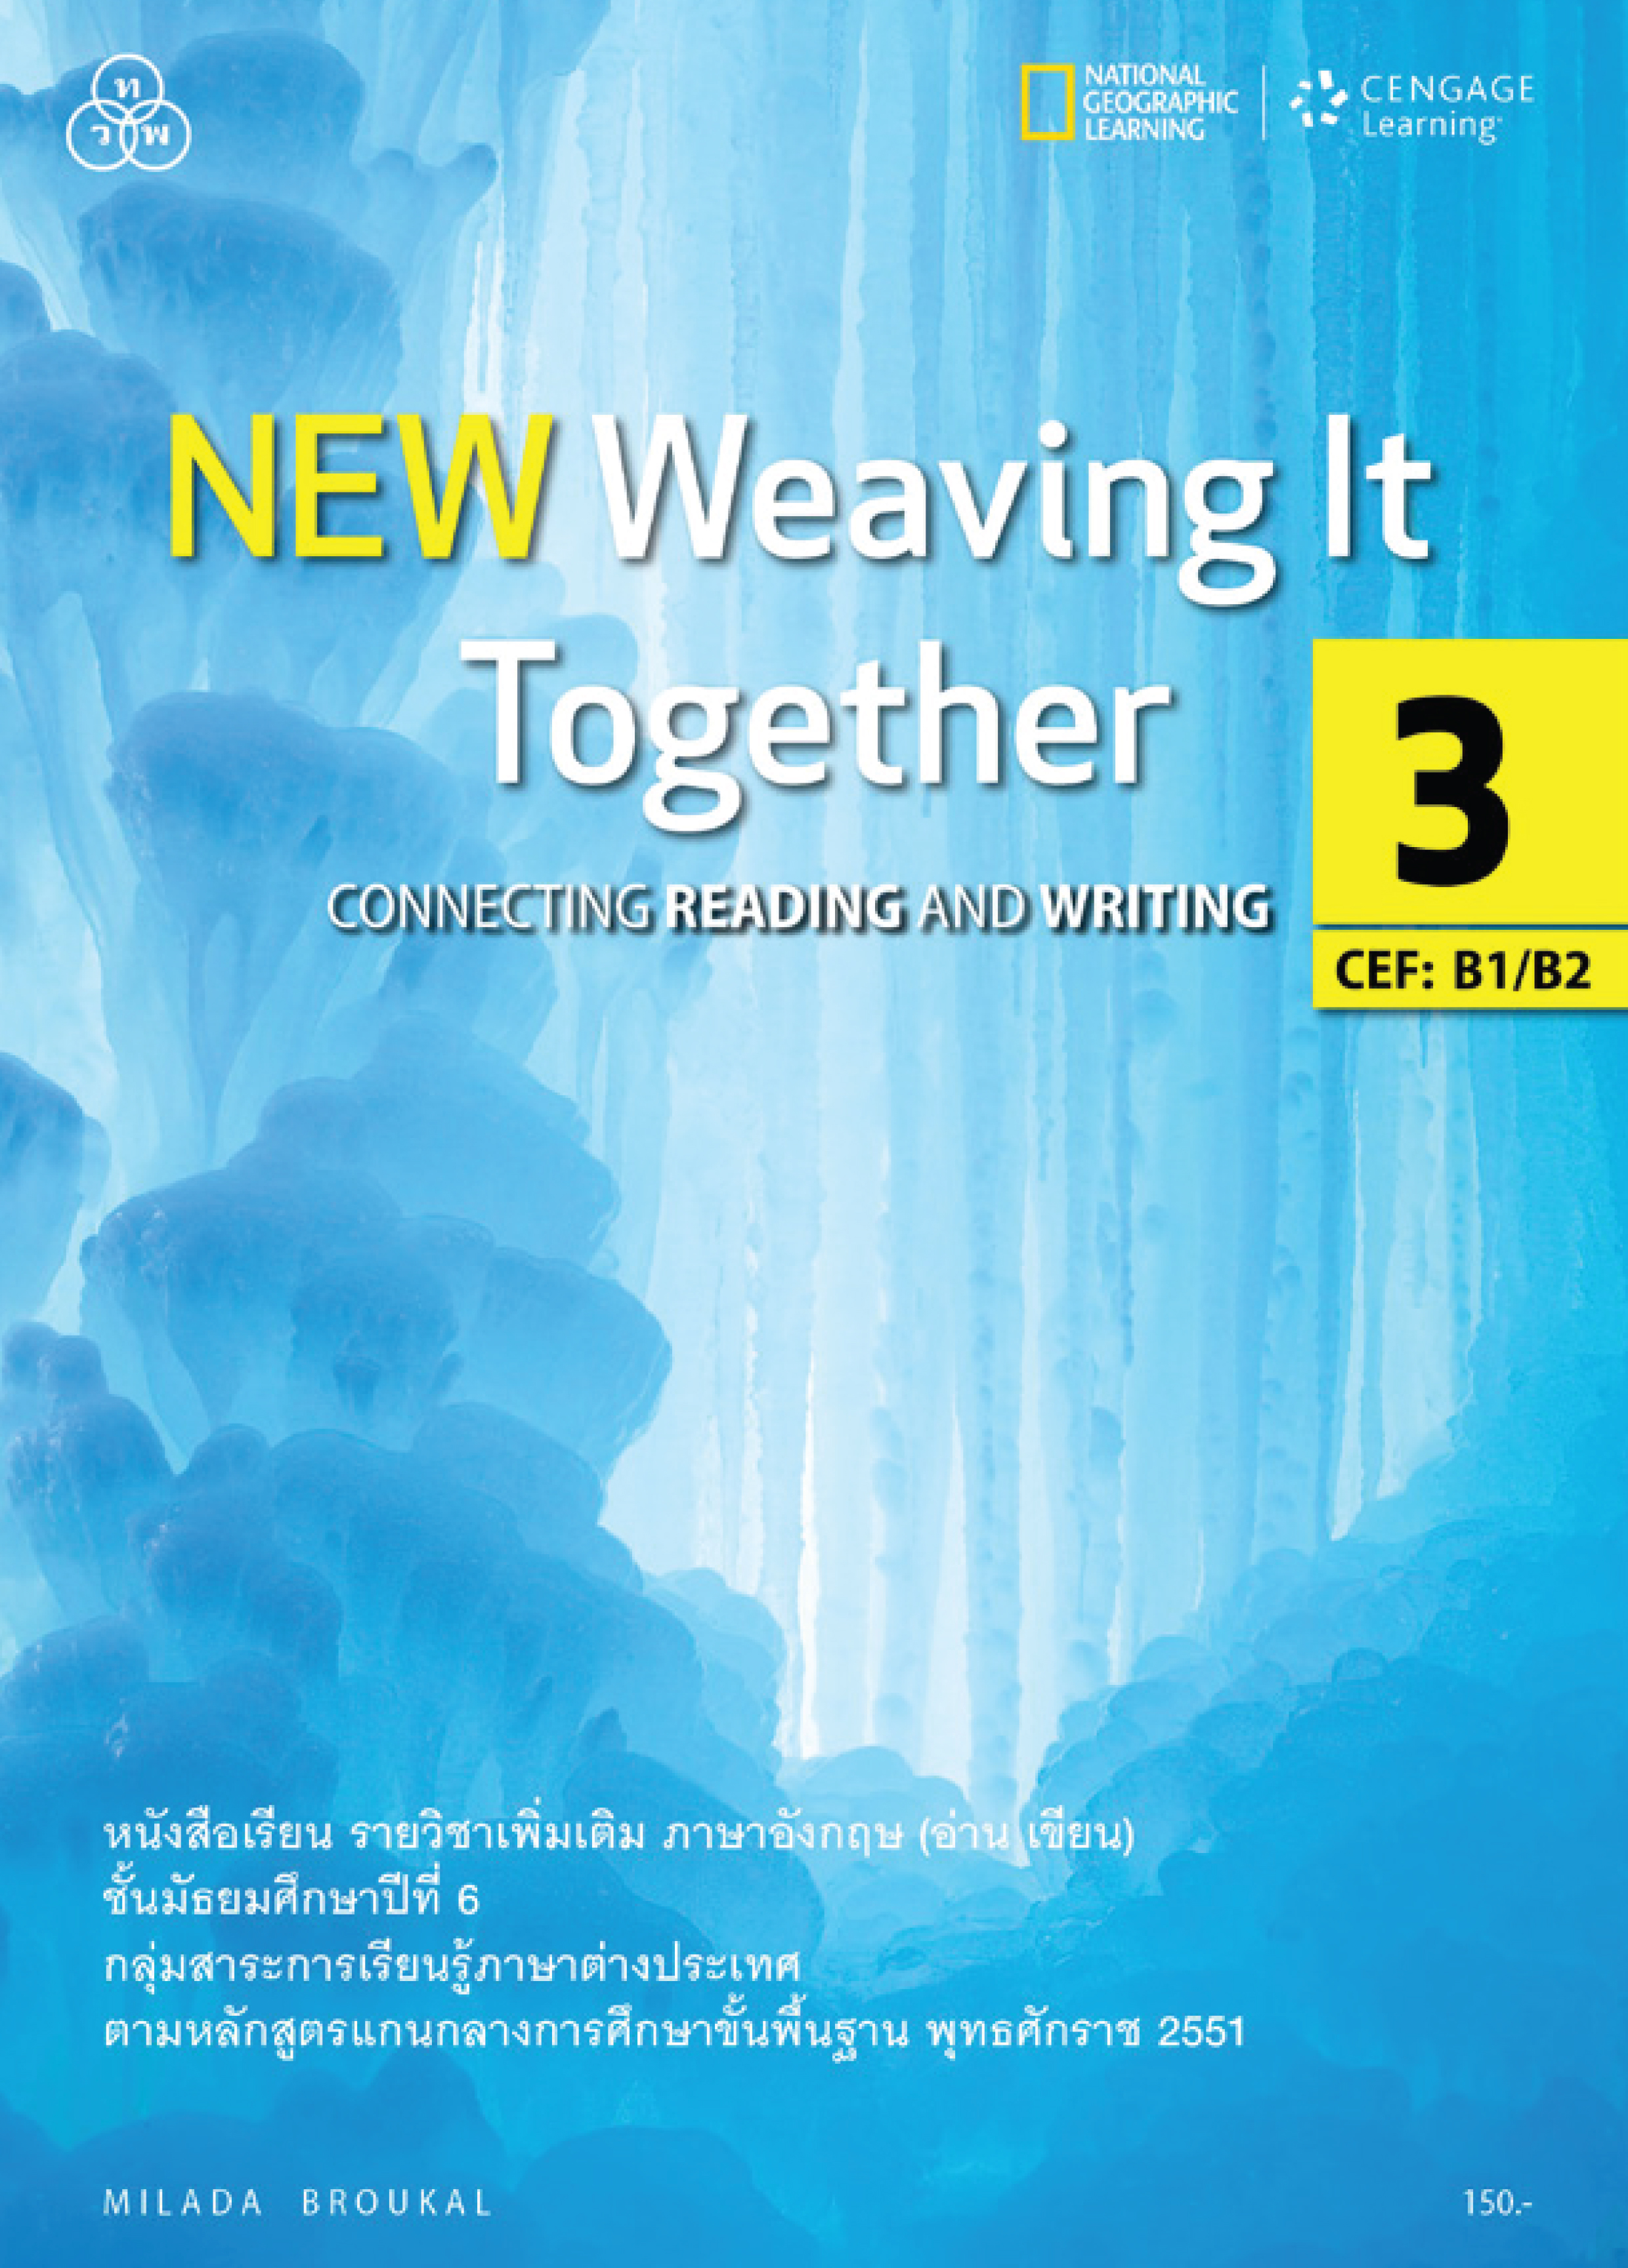 NEW WEAVING IT TOGETHER 3